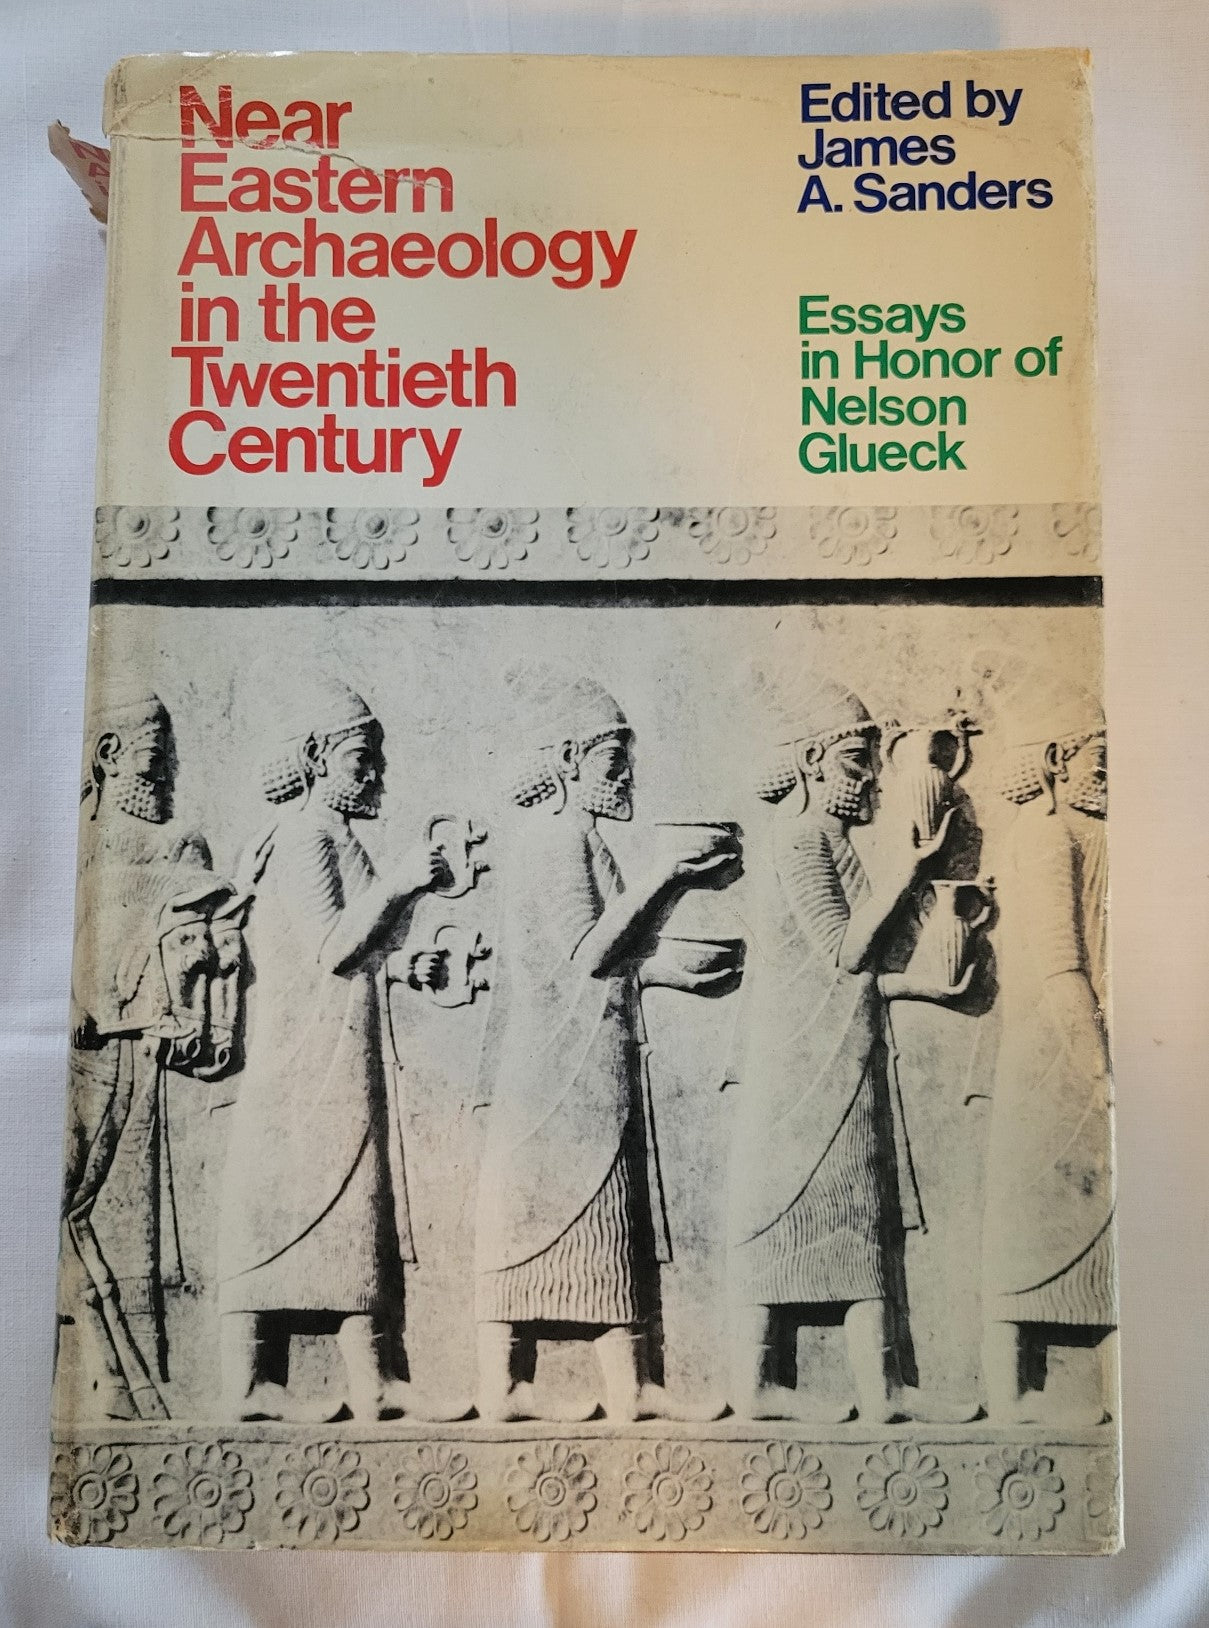 Used book for sale, “Near Eastern Archaeology in the Twentieth Century” edited by James A. Sanders, written in honor of Nelson Glueck. View of front cover.